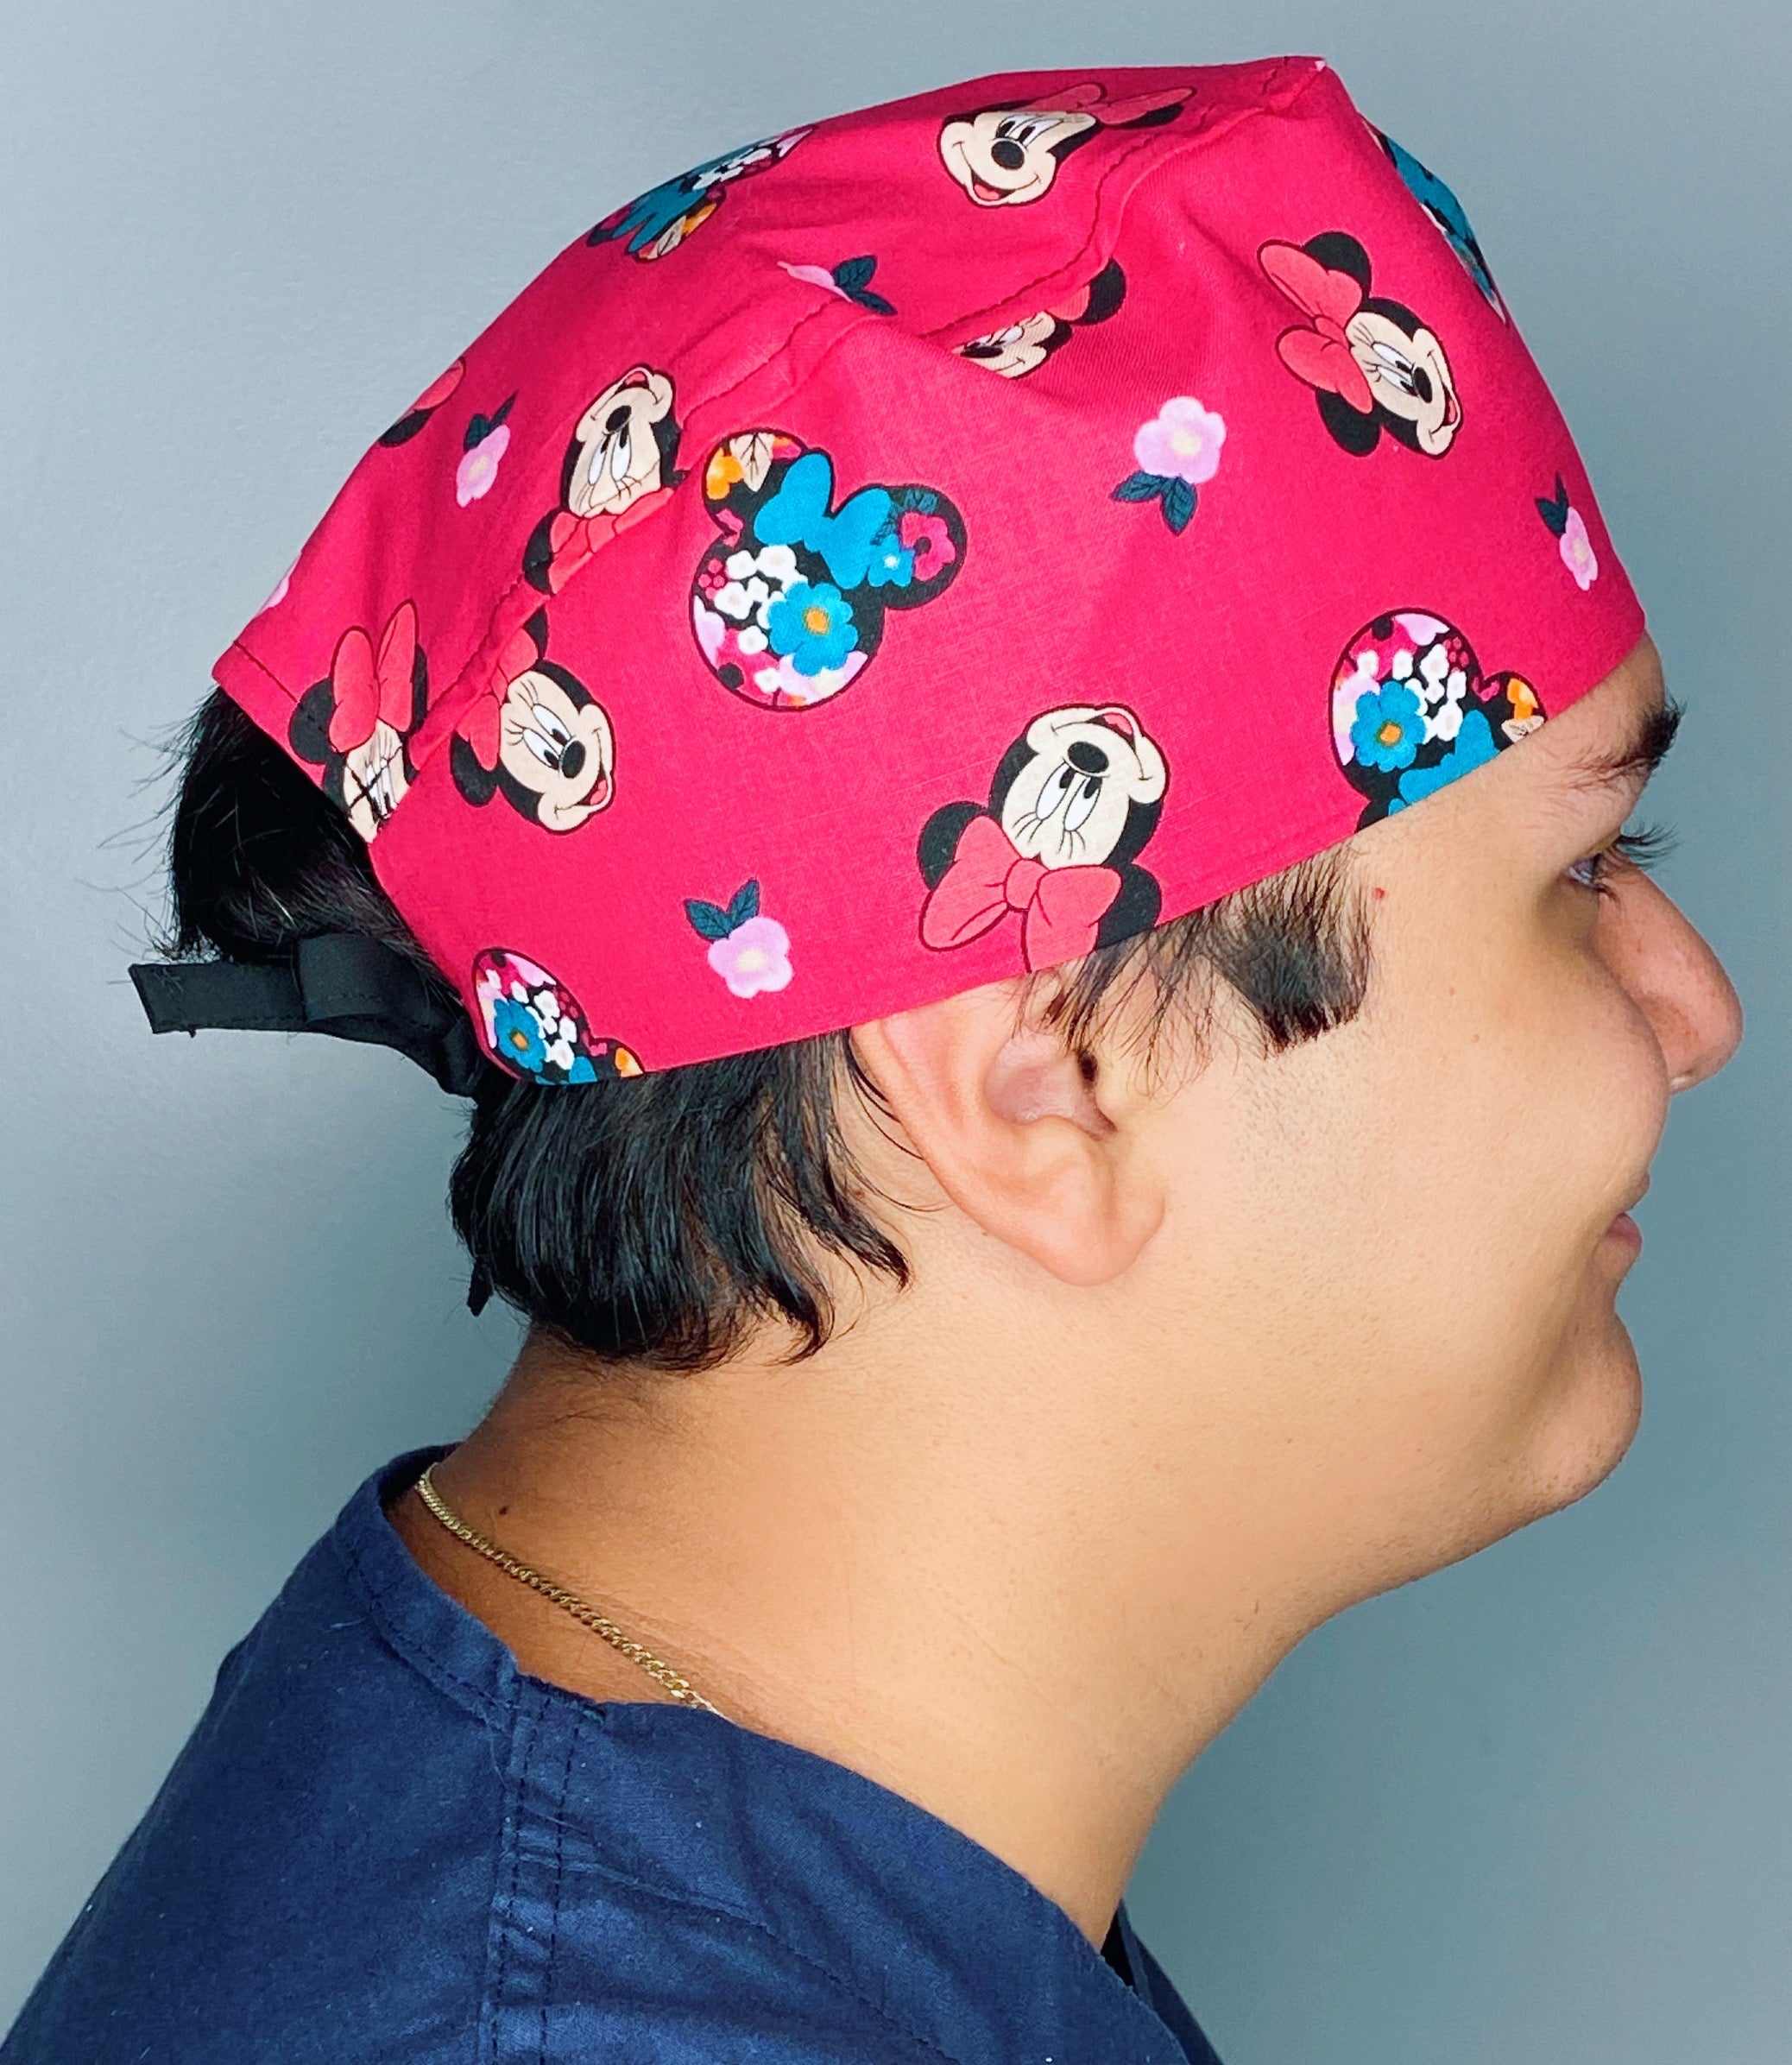 Girly Mouse with Polka Dot Bow Red Floral Unisex Geek Scrub Cap